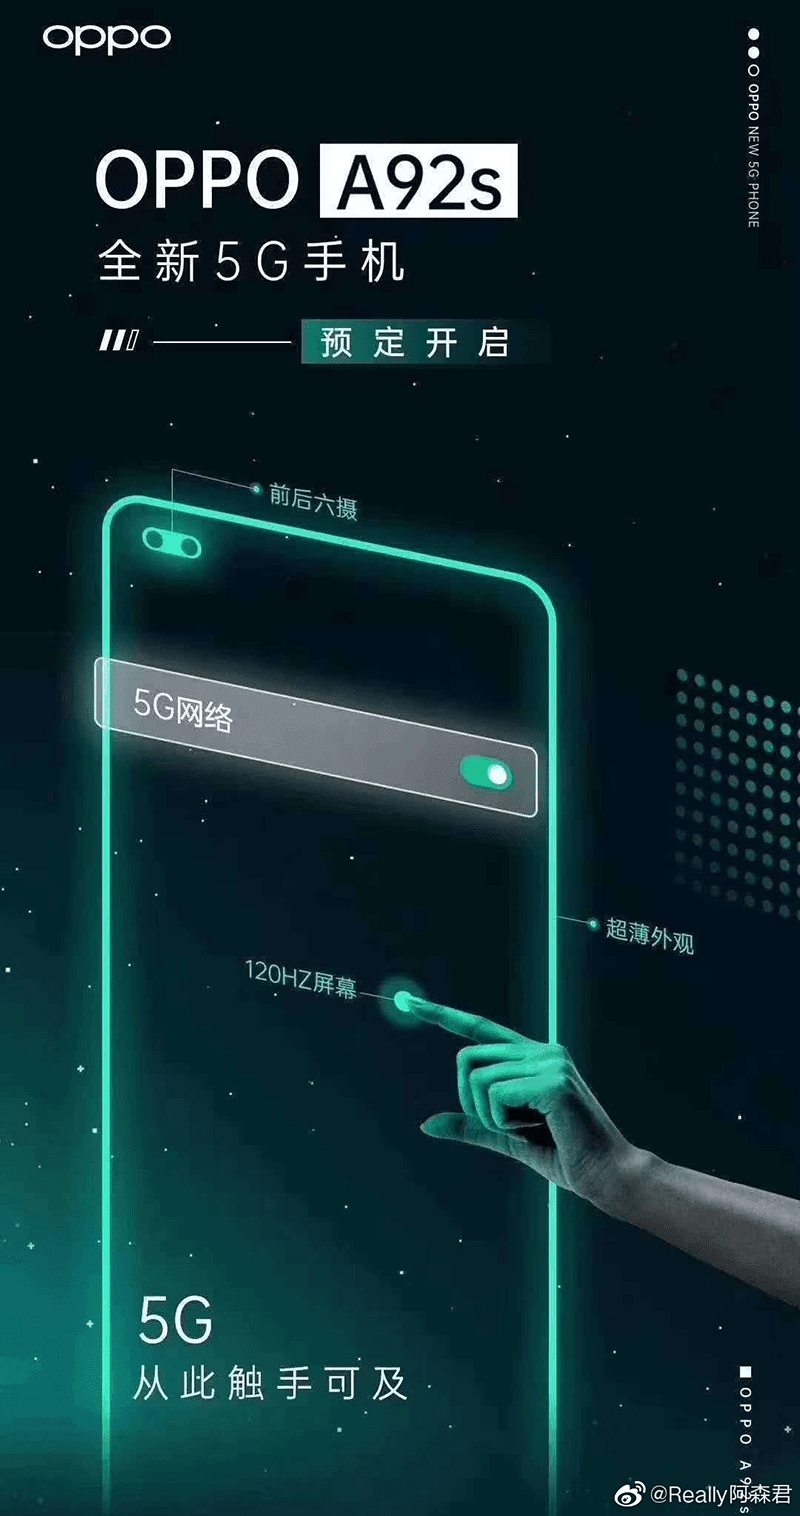 The official-looking OPPO A92s teaser